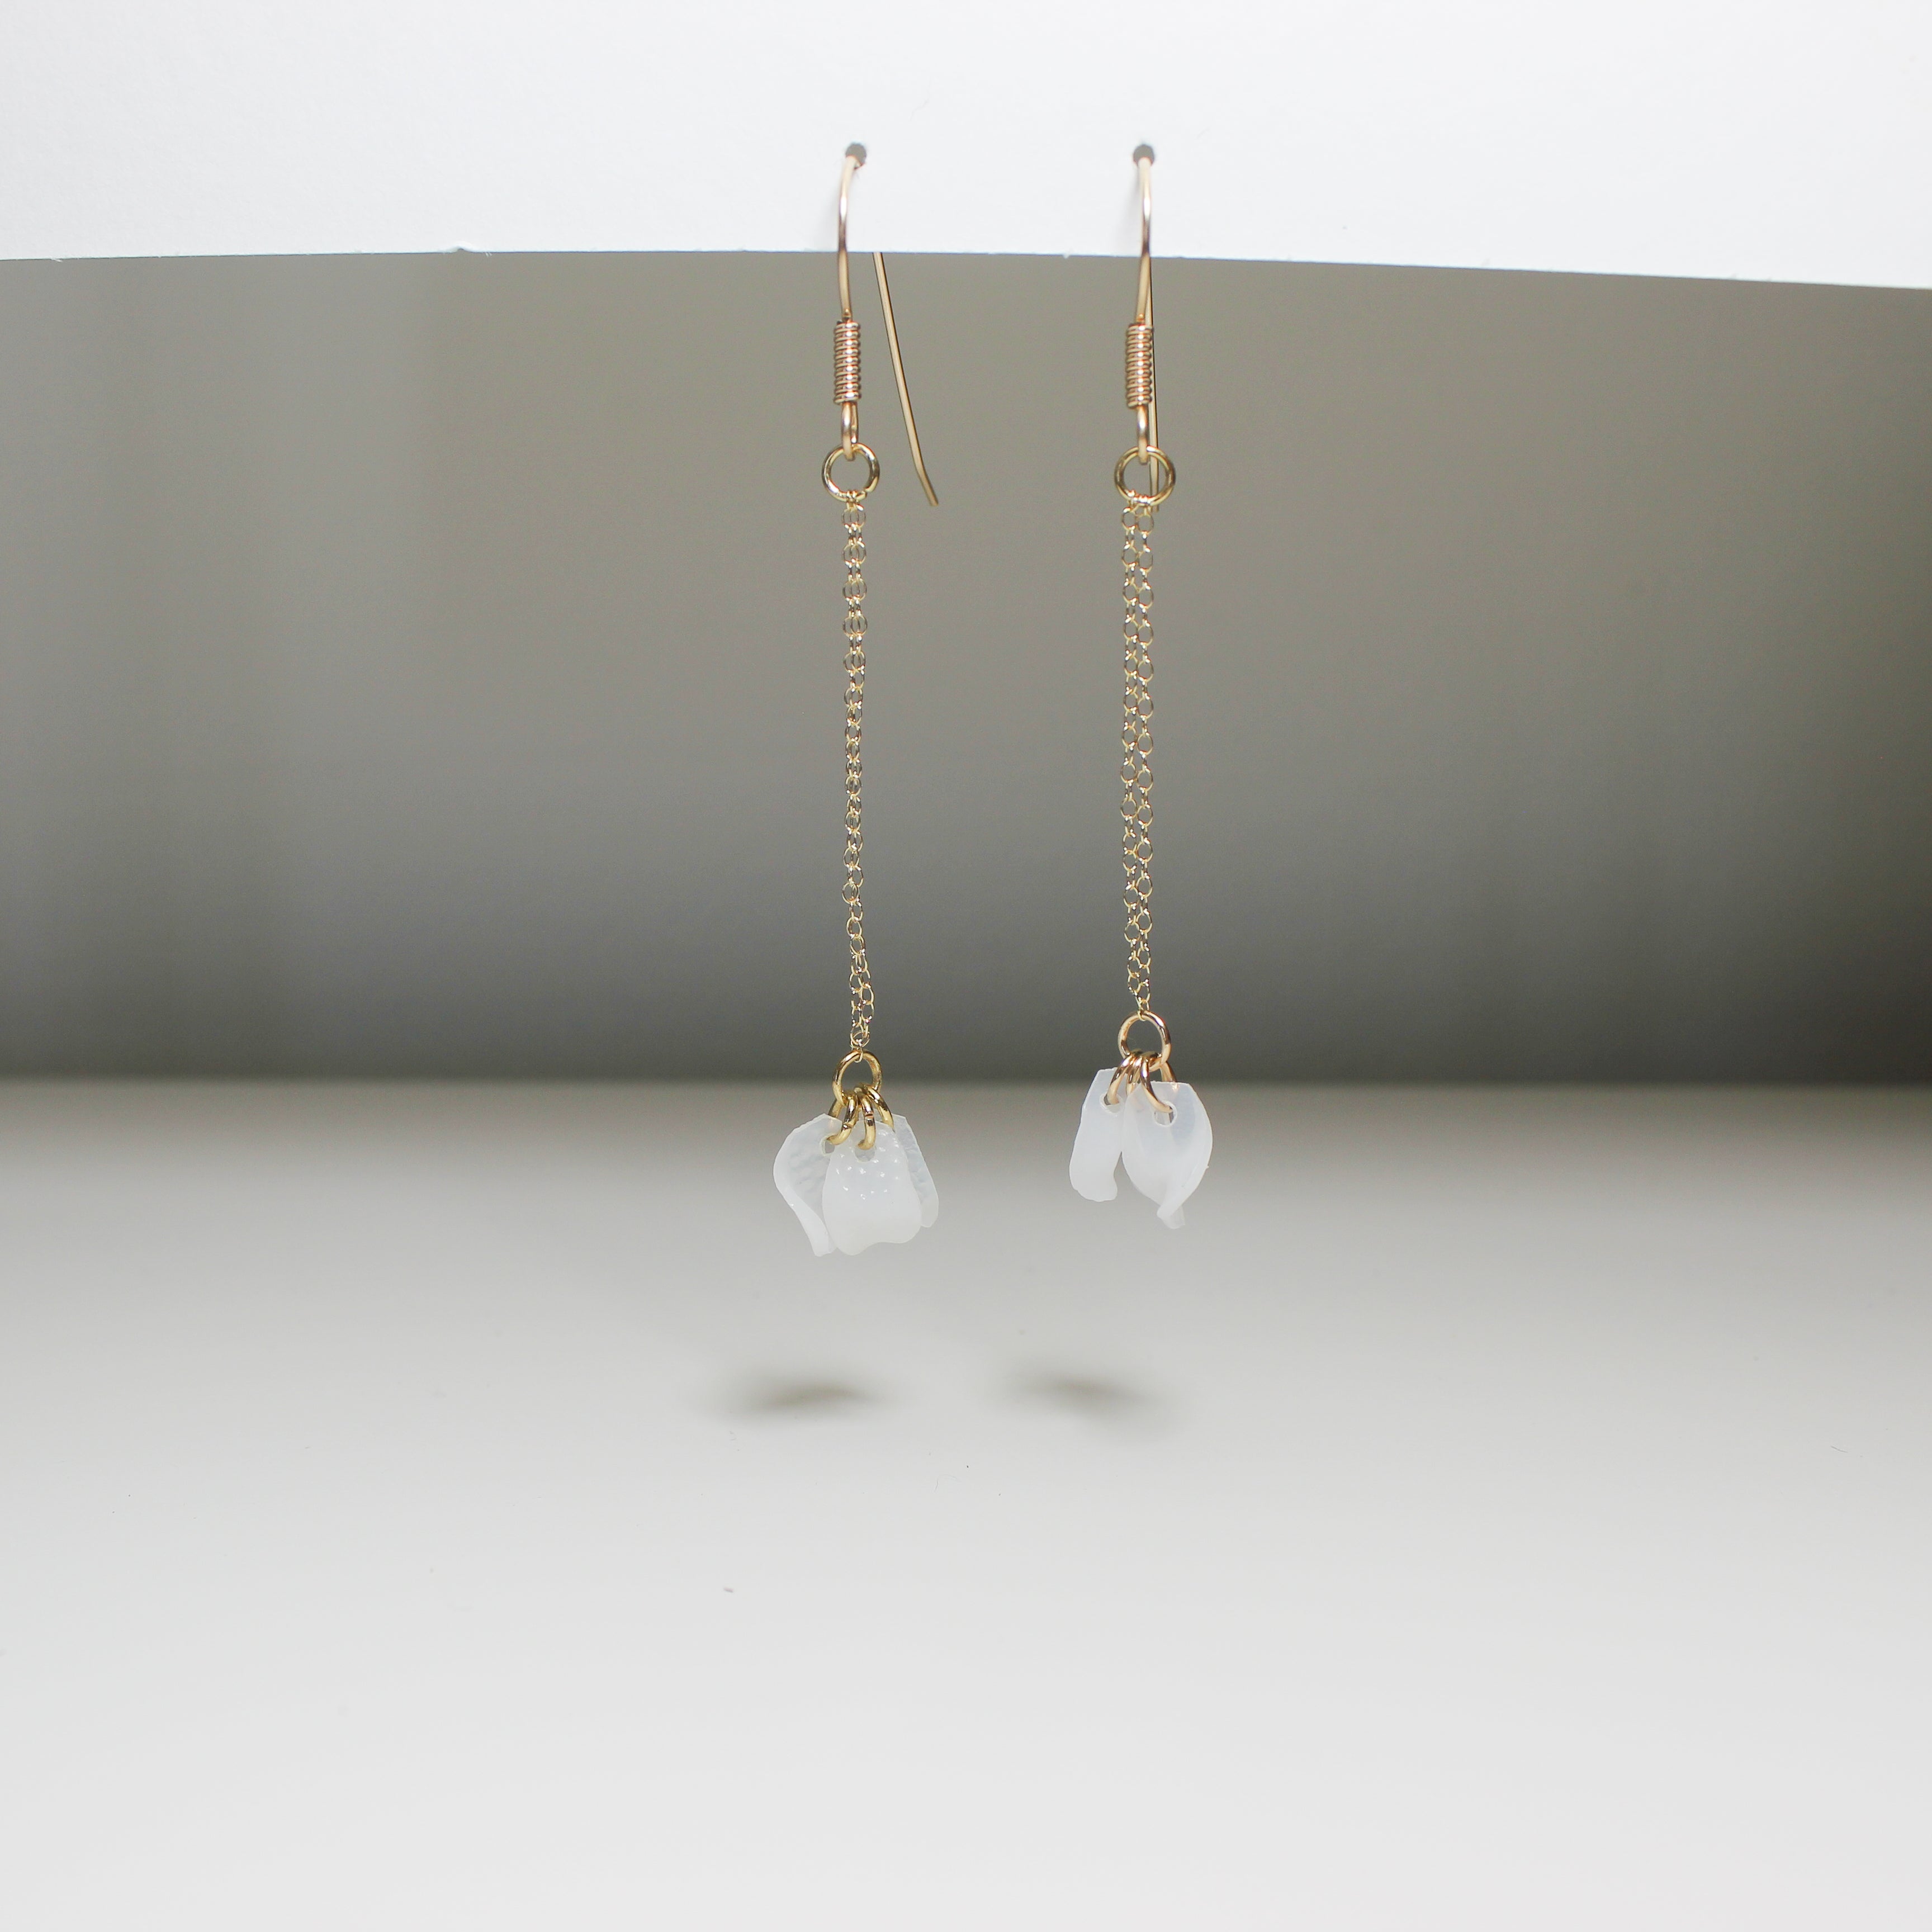 Sustainable Handmade Gold Pendants with Recycled Materials - Earrings - Bijou Her -  -  - 